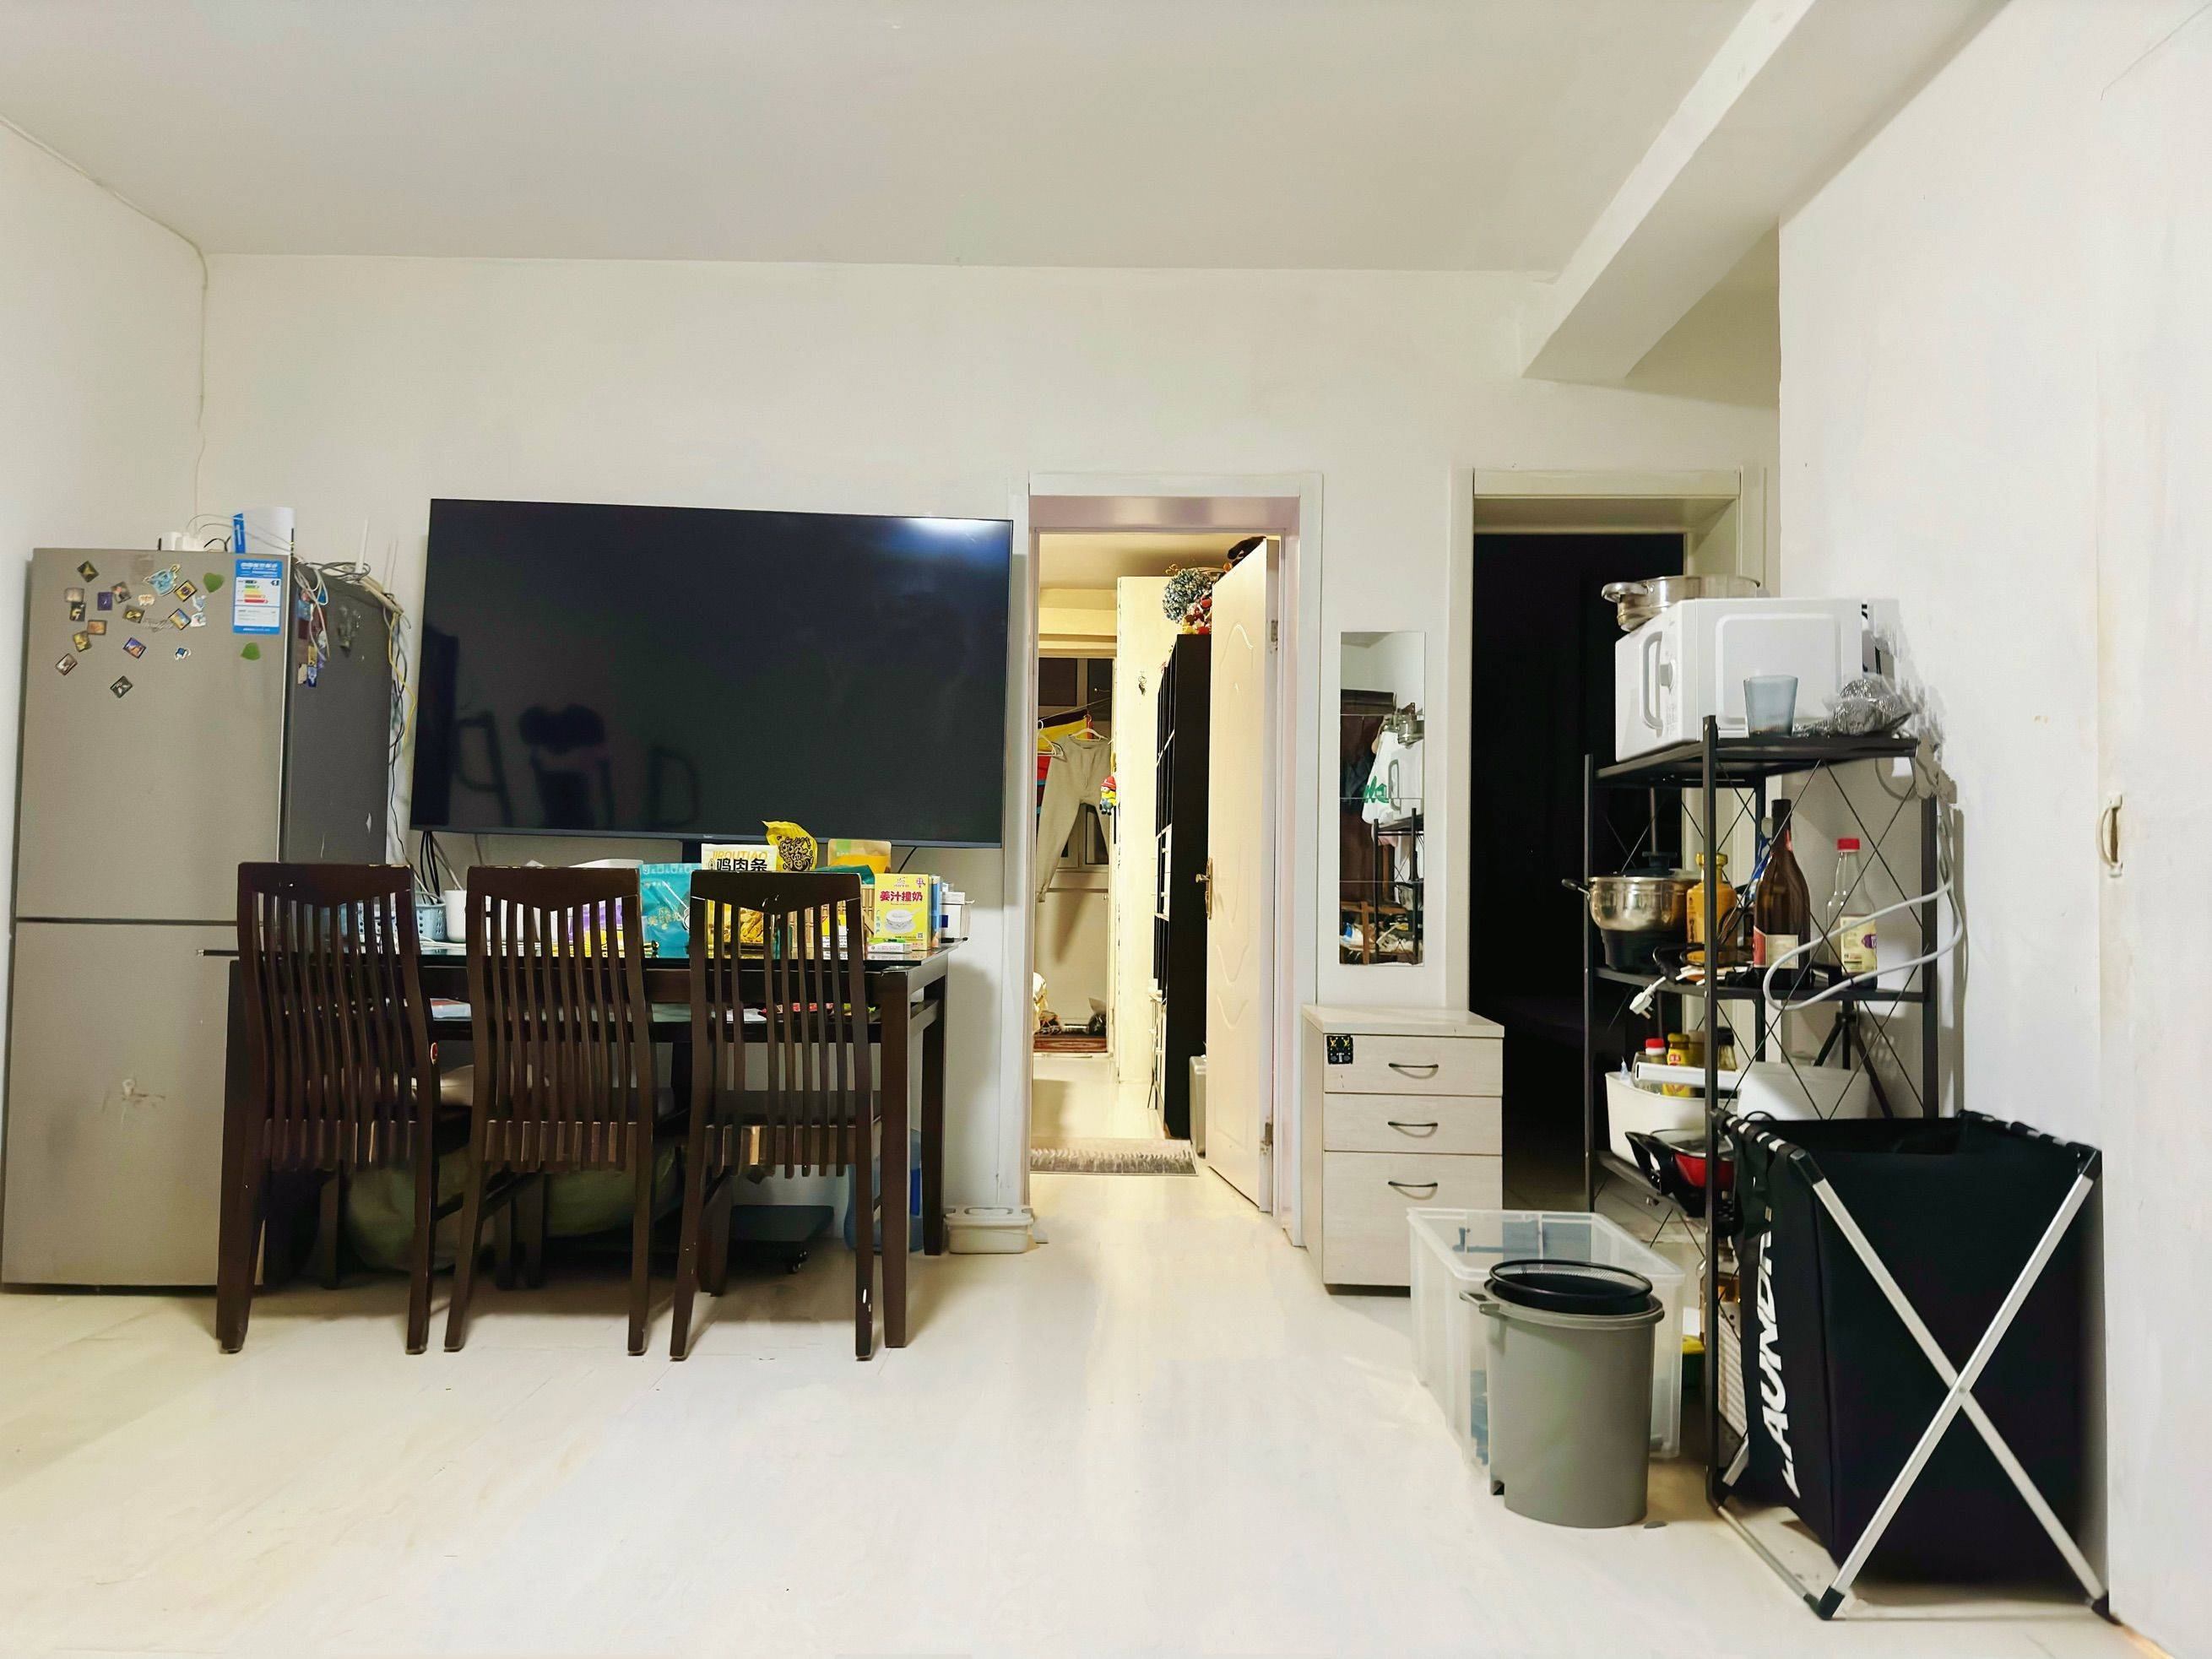 Beijing-Haidian-Cozy Home,Clean&Comfy,No Gender Limit,Chilled,Pet Friendly